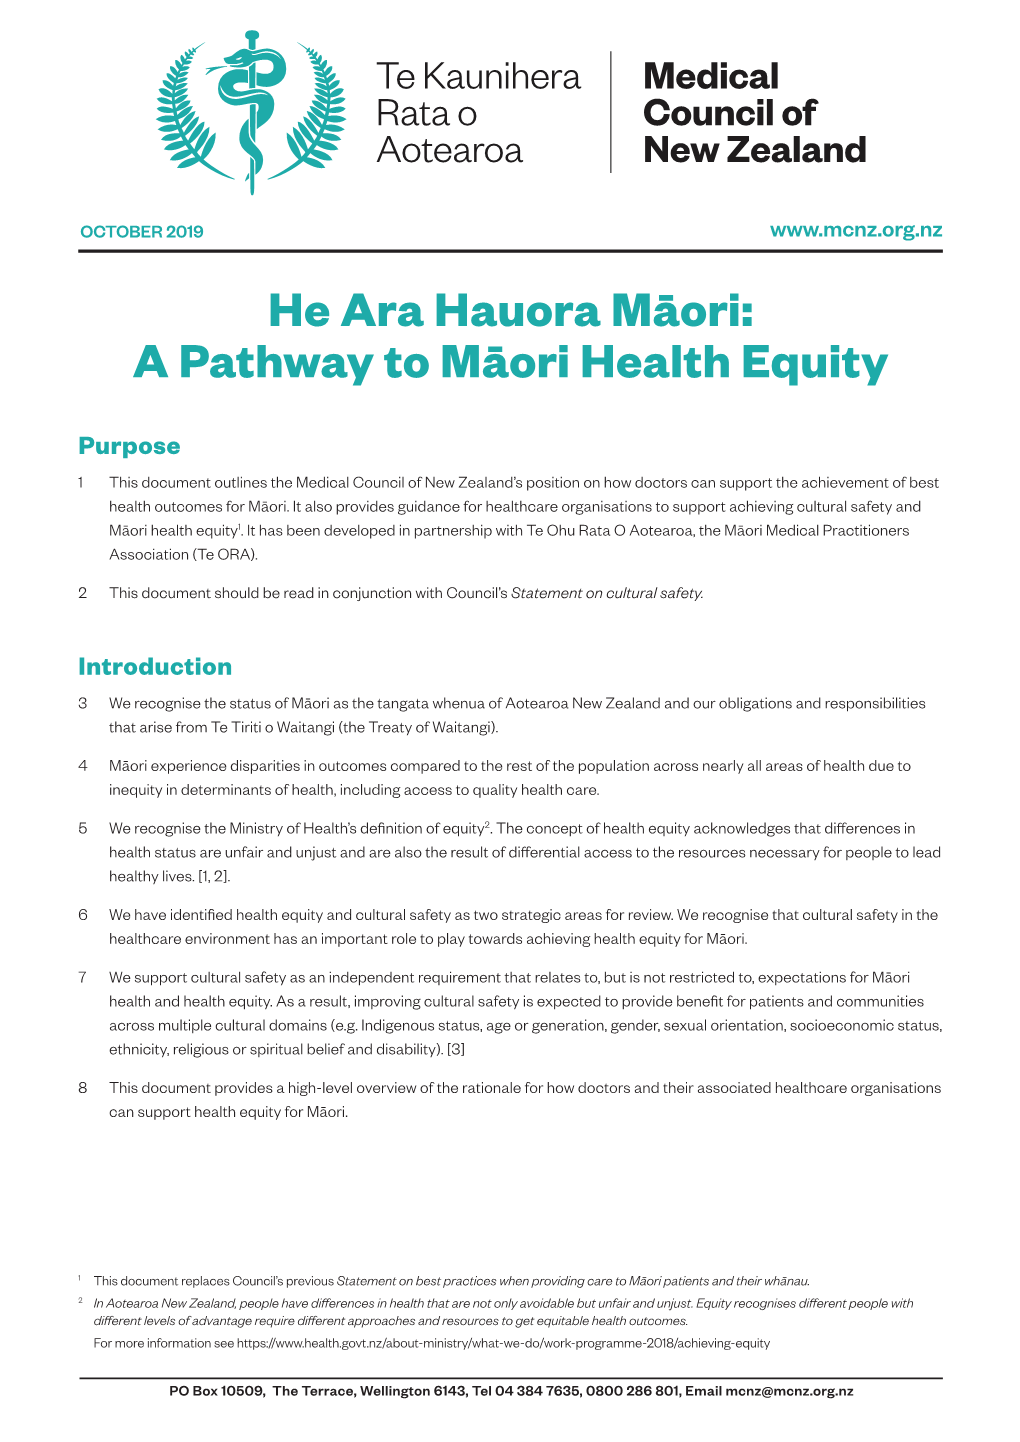 A Pathway to Māori Health Equity